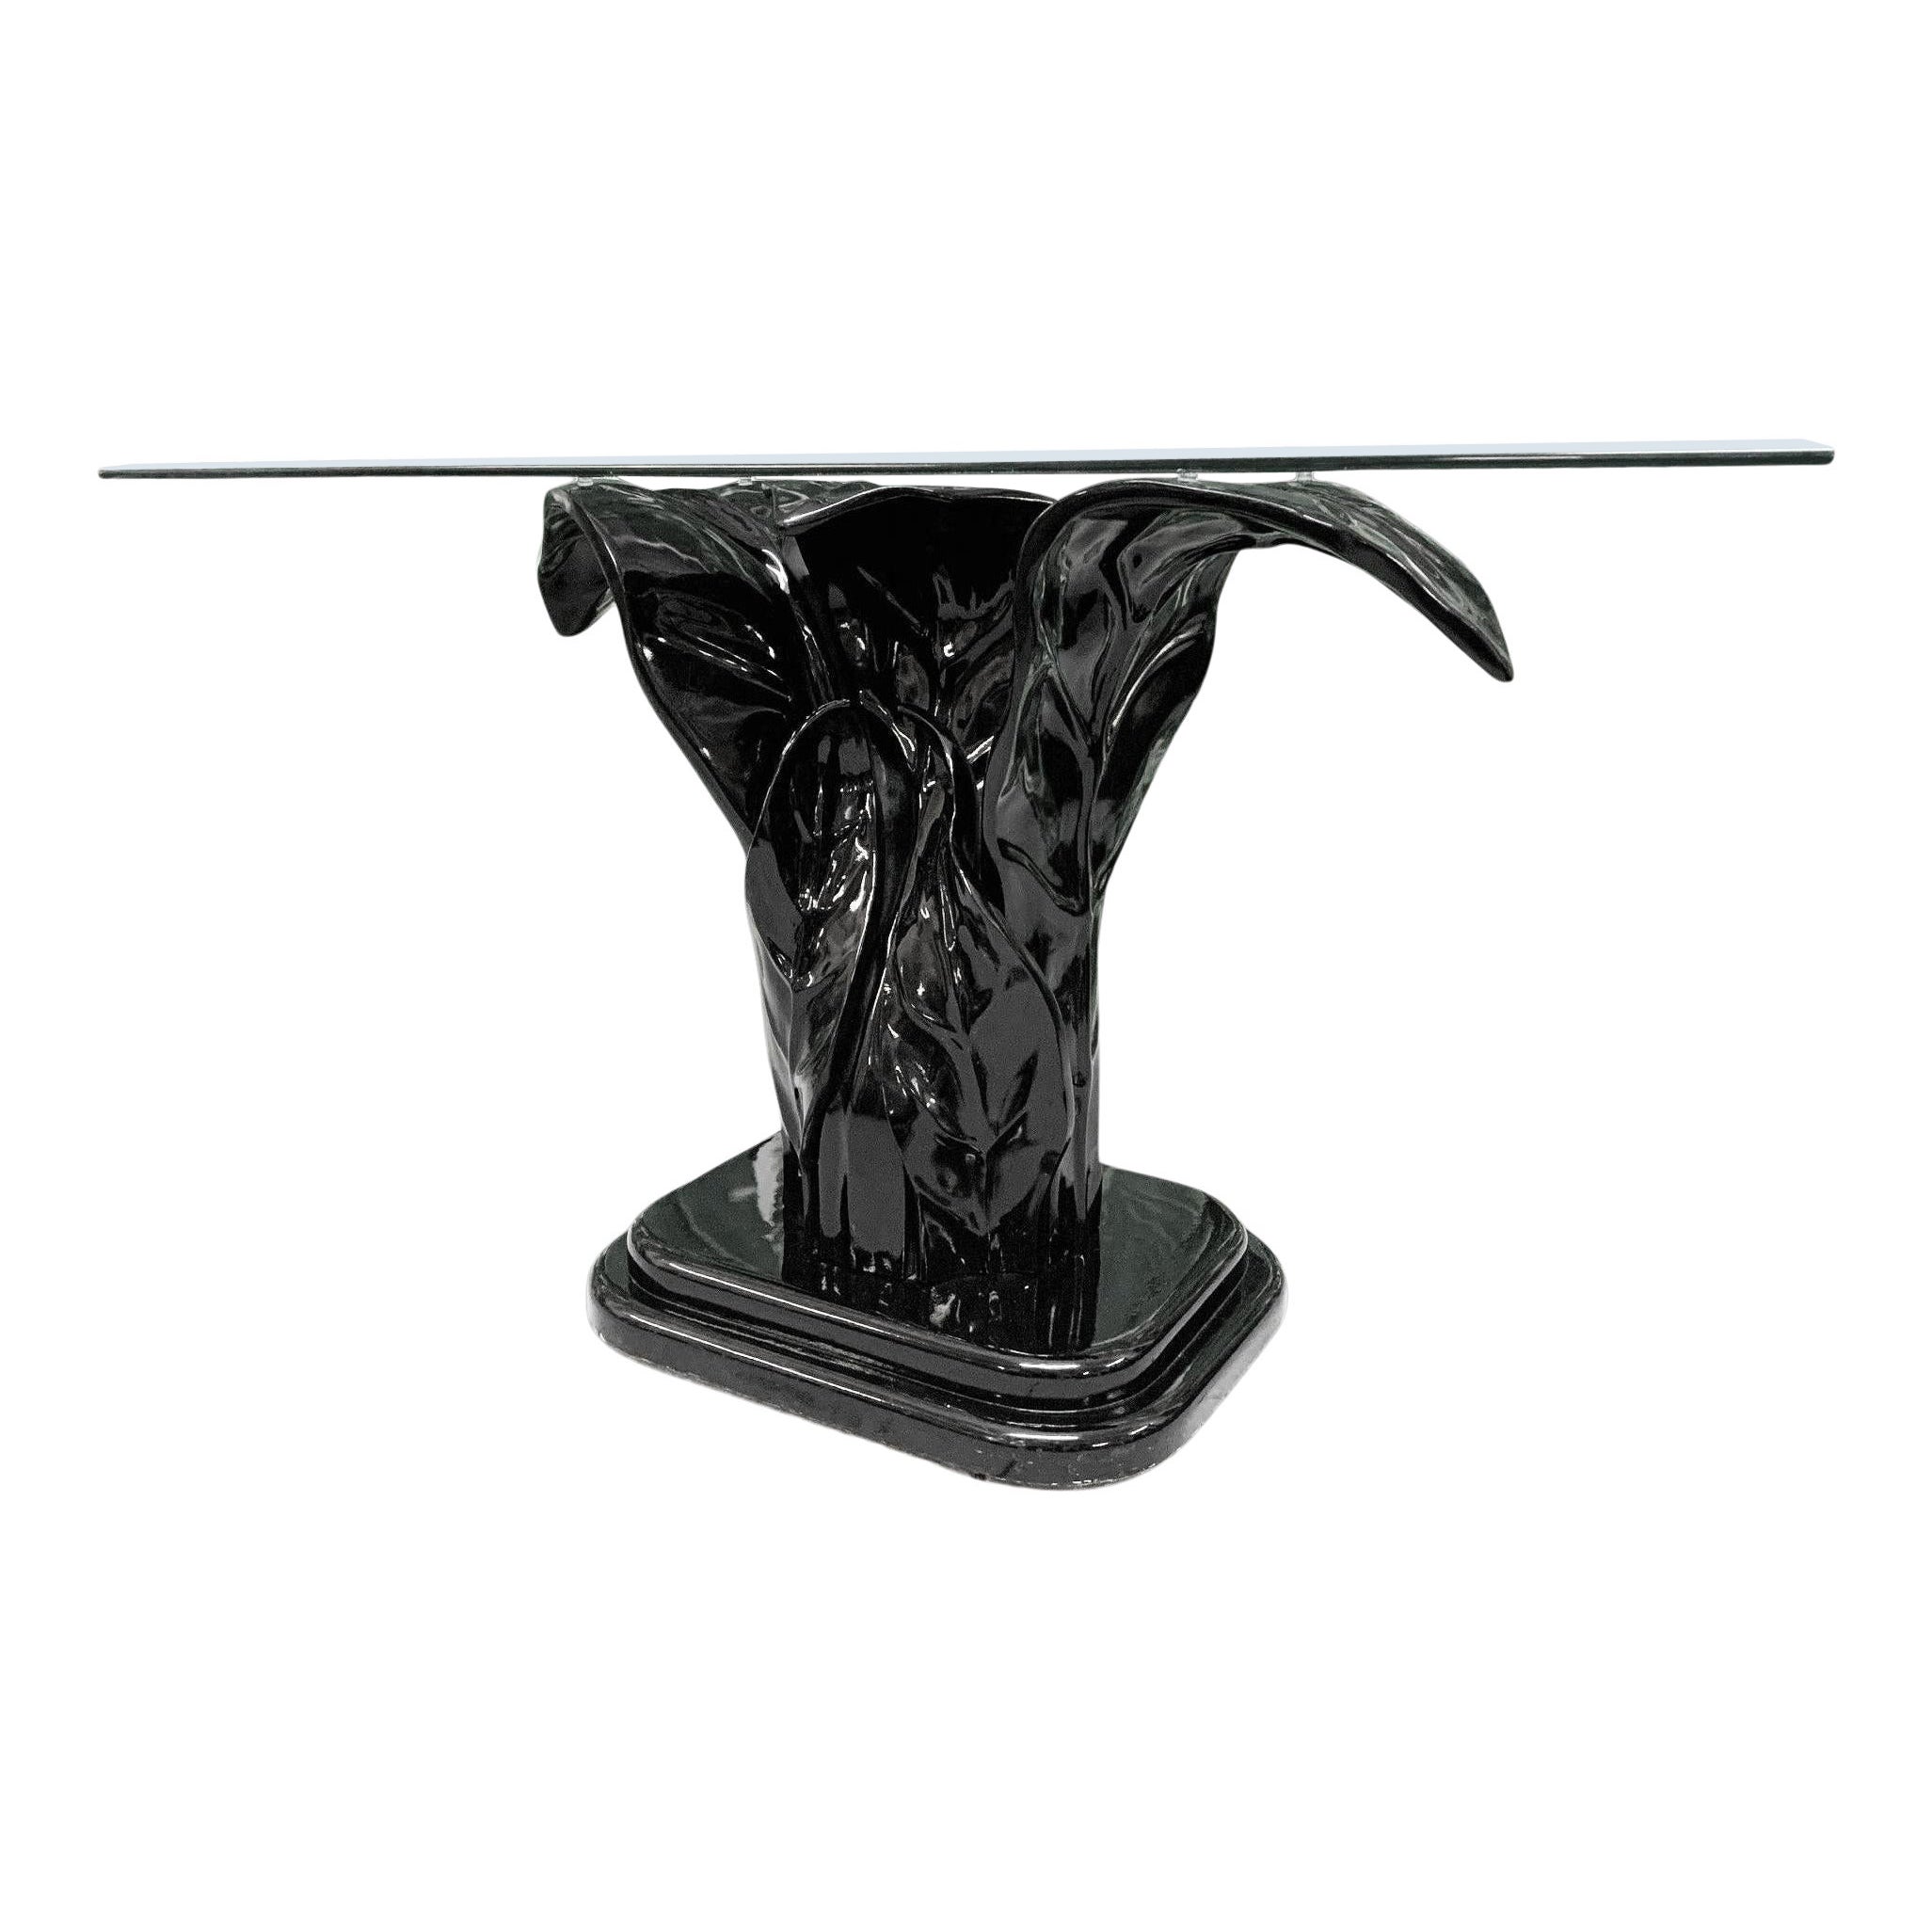 Serge Roche Sculptural Plume Console Attributed to Serge Roche For Sale